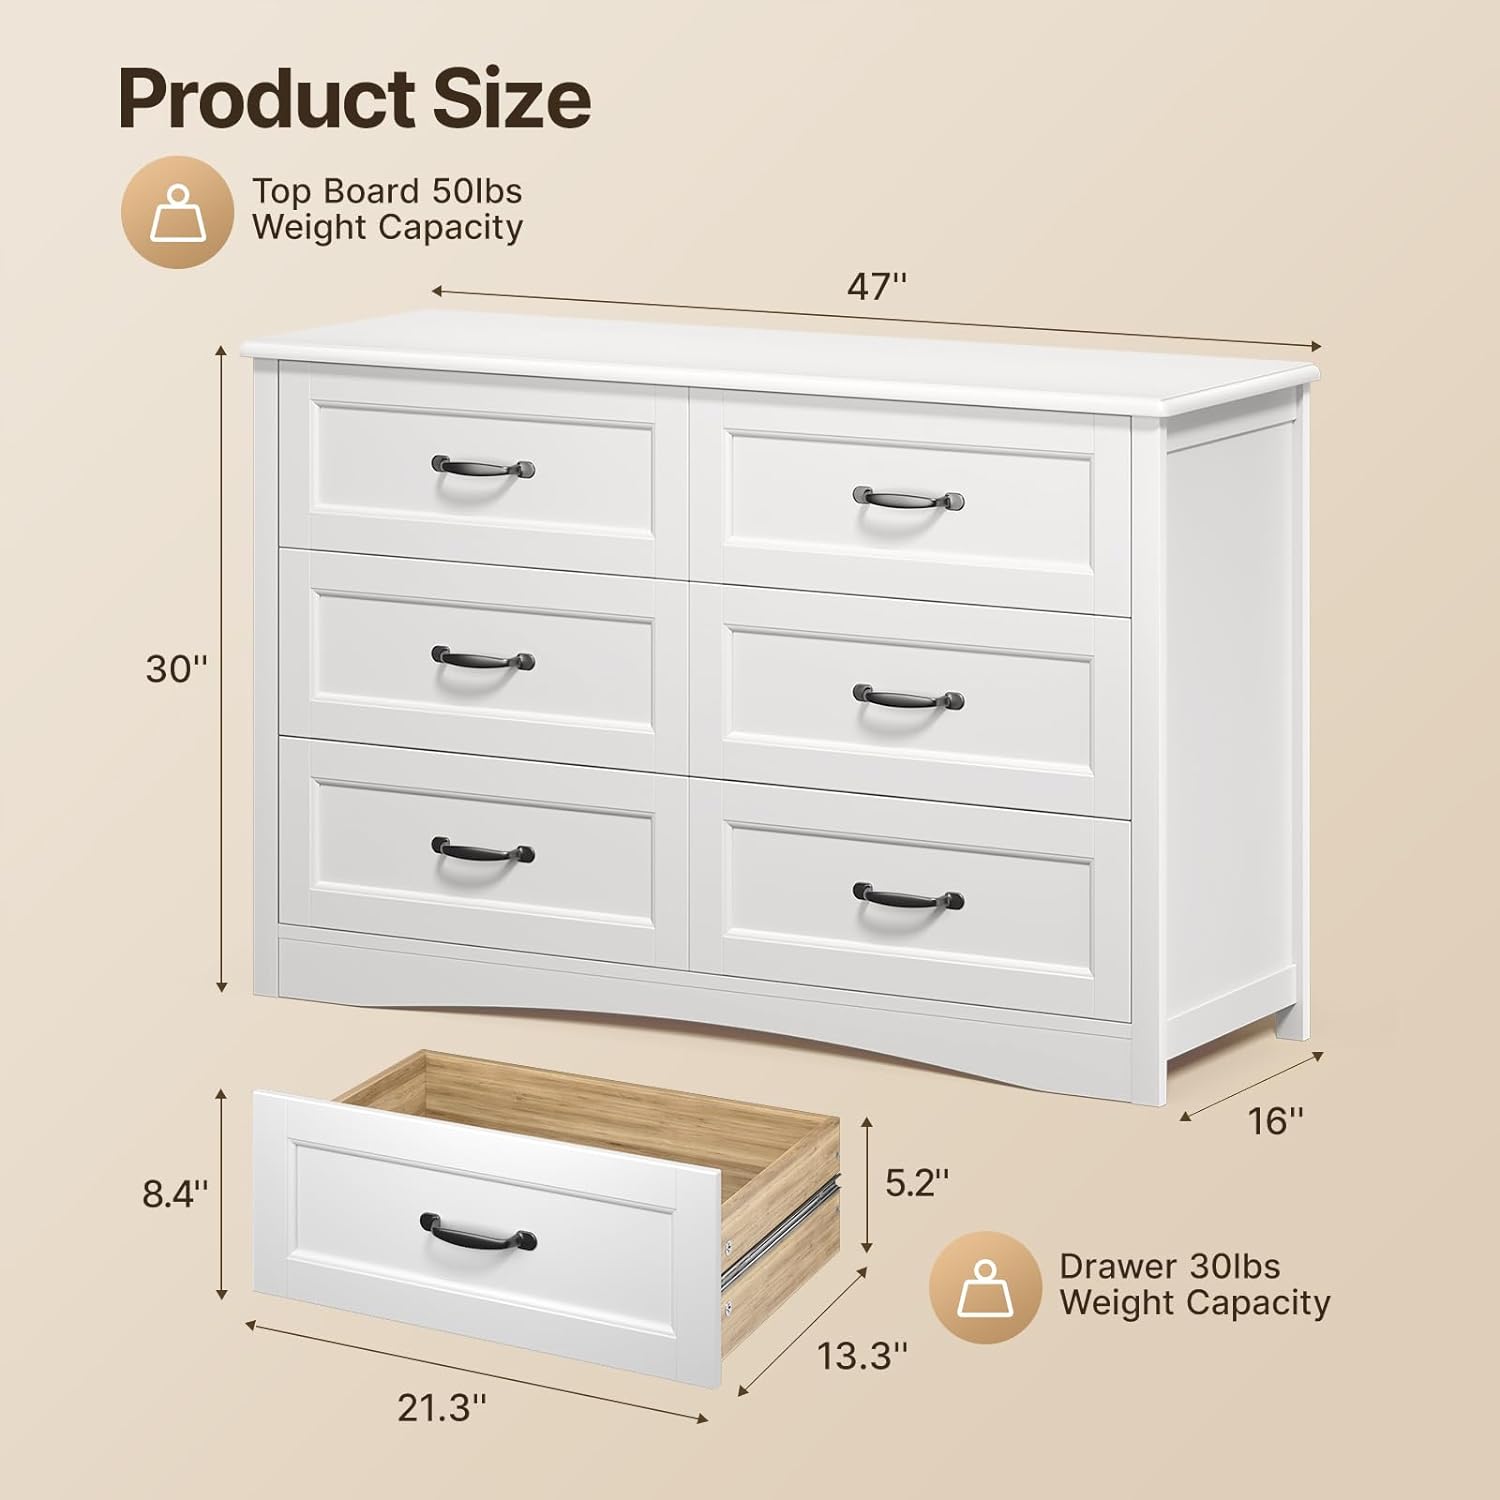 Gizoon 6 Drawer Dresser for Bedroom White Dressers Chests of Drawers with Mental Handle